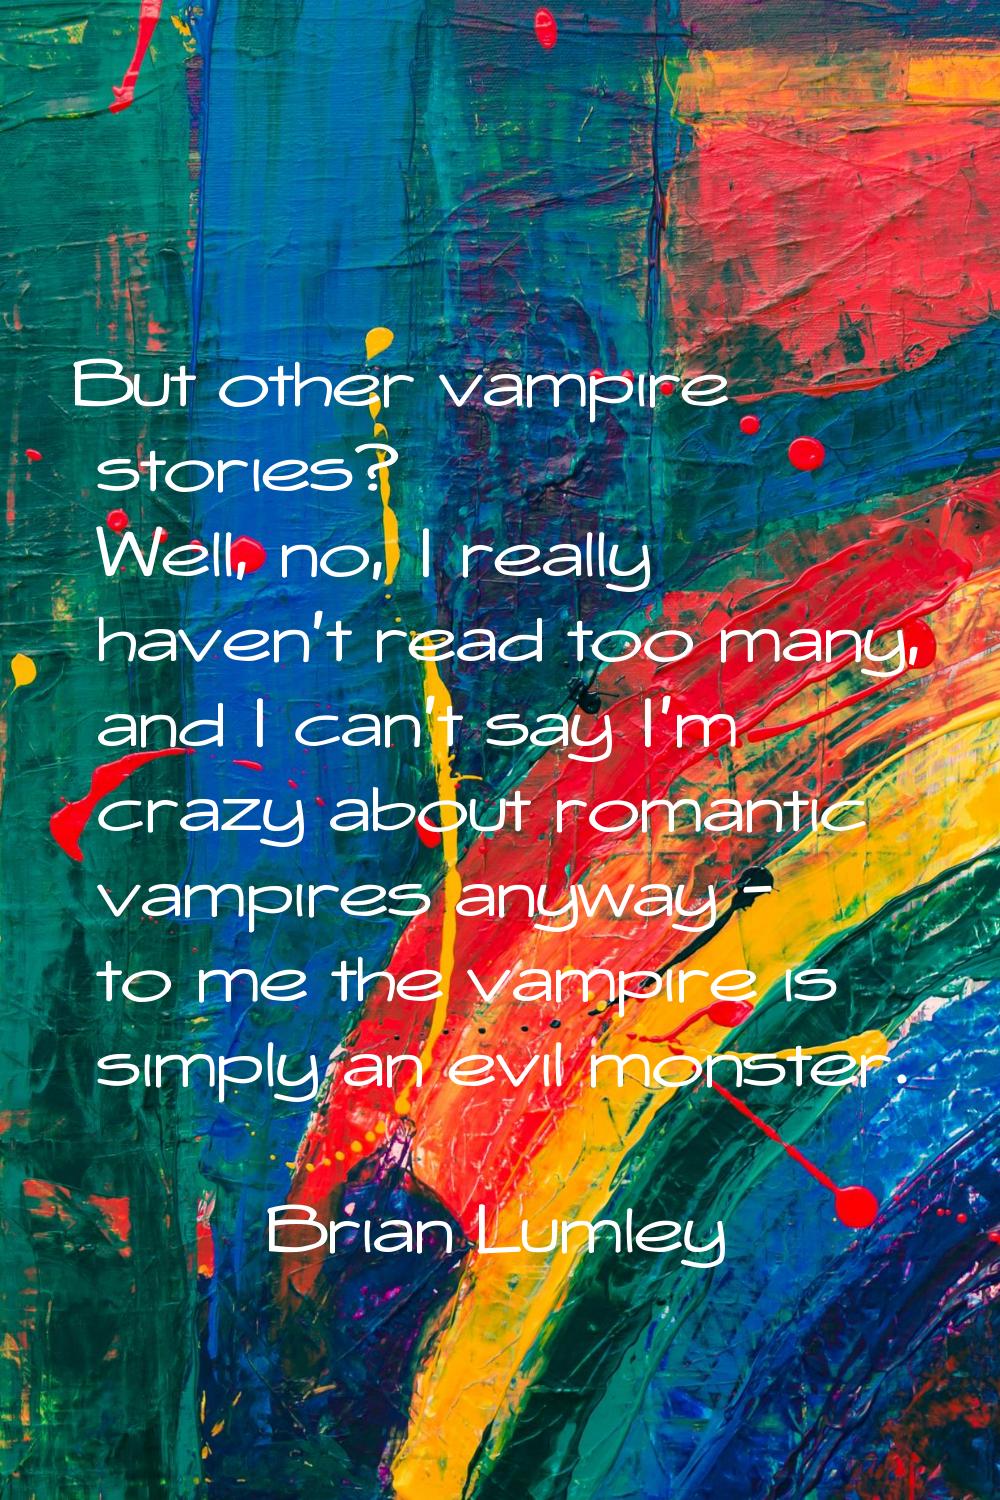 But other vampire stories? Well, no, I really haven't read too many, and I can't say I'm crazy abou